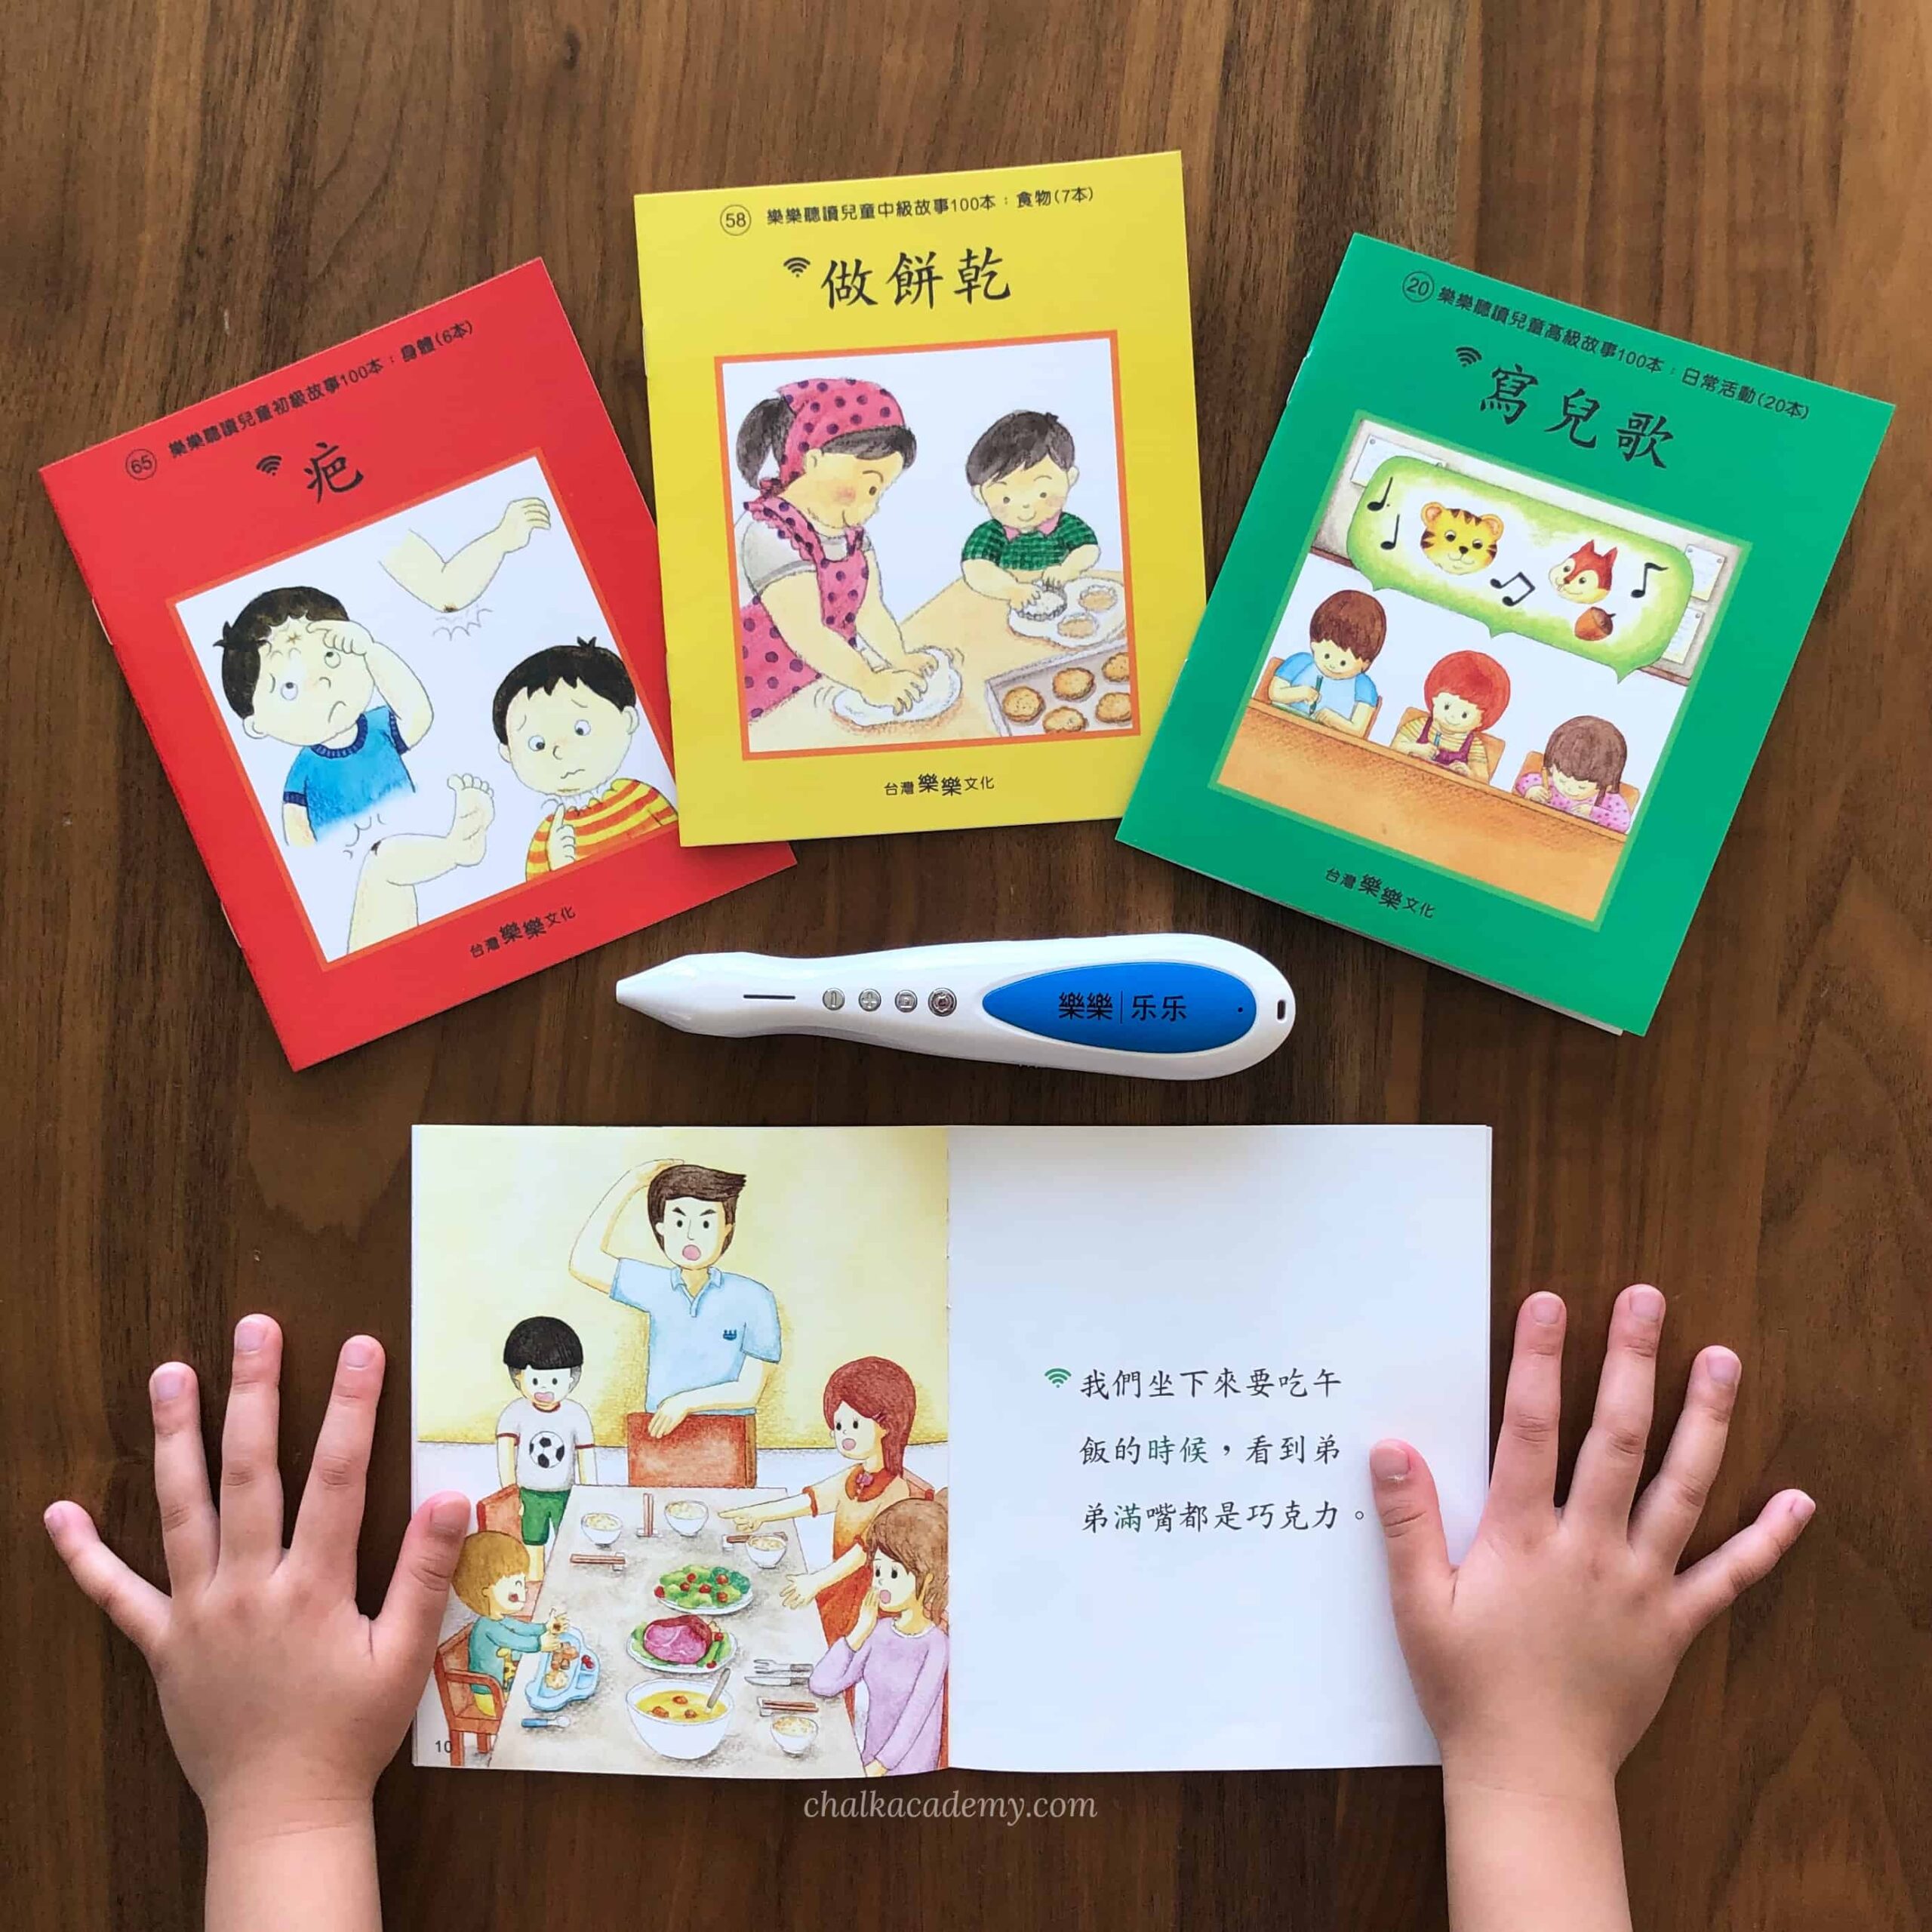 Le Le Chinese Reading Pen Books 樂樂文化 Help Kids Learn